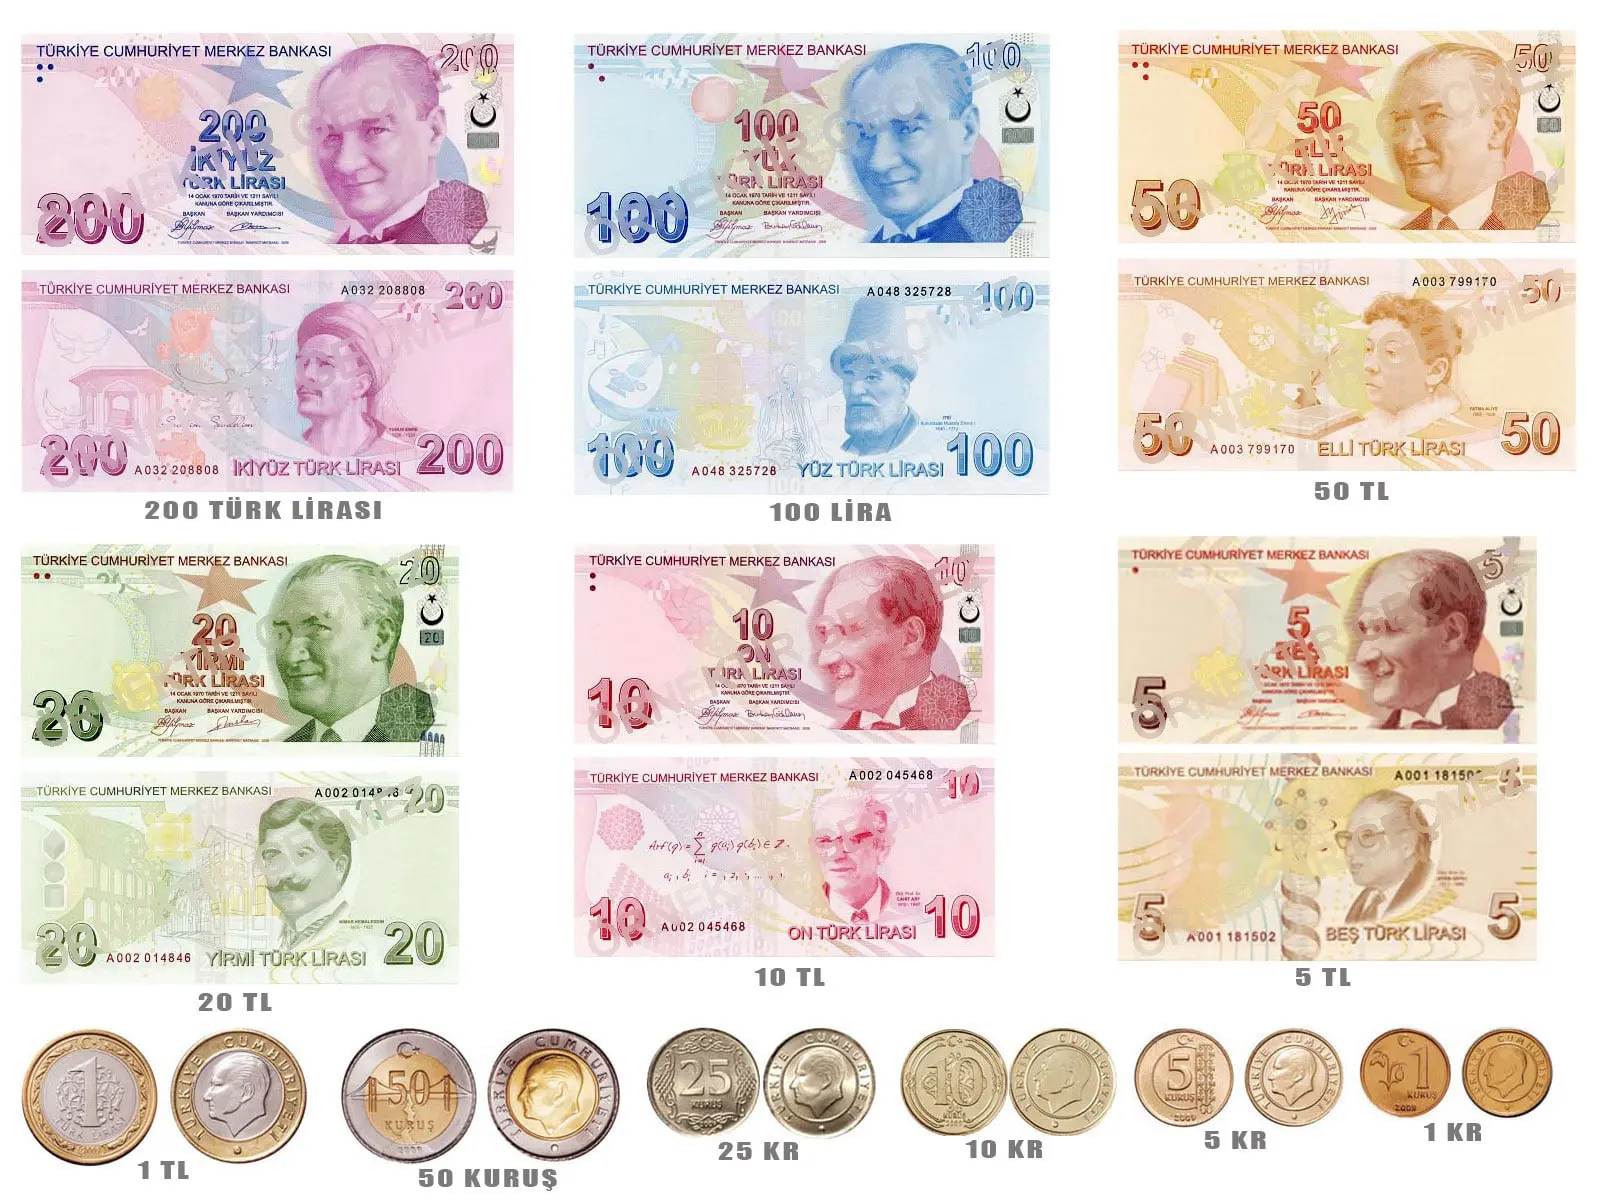 turkish currency turkish lira banknotes and coins